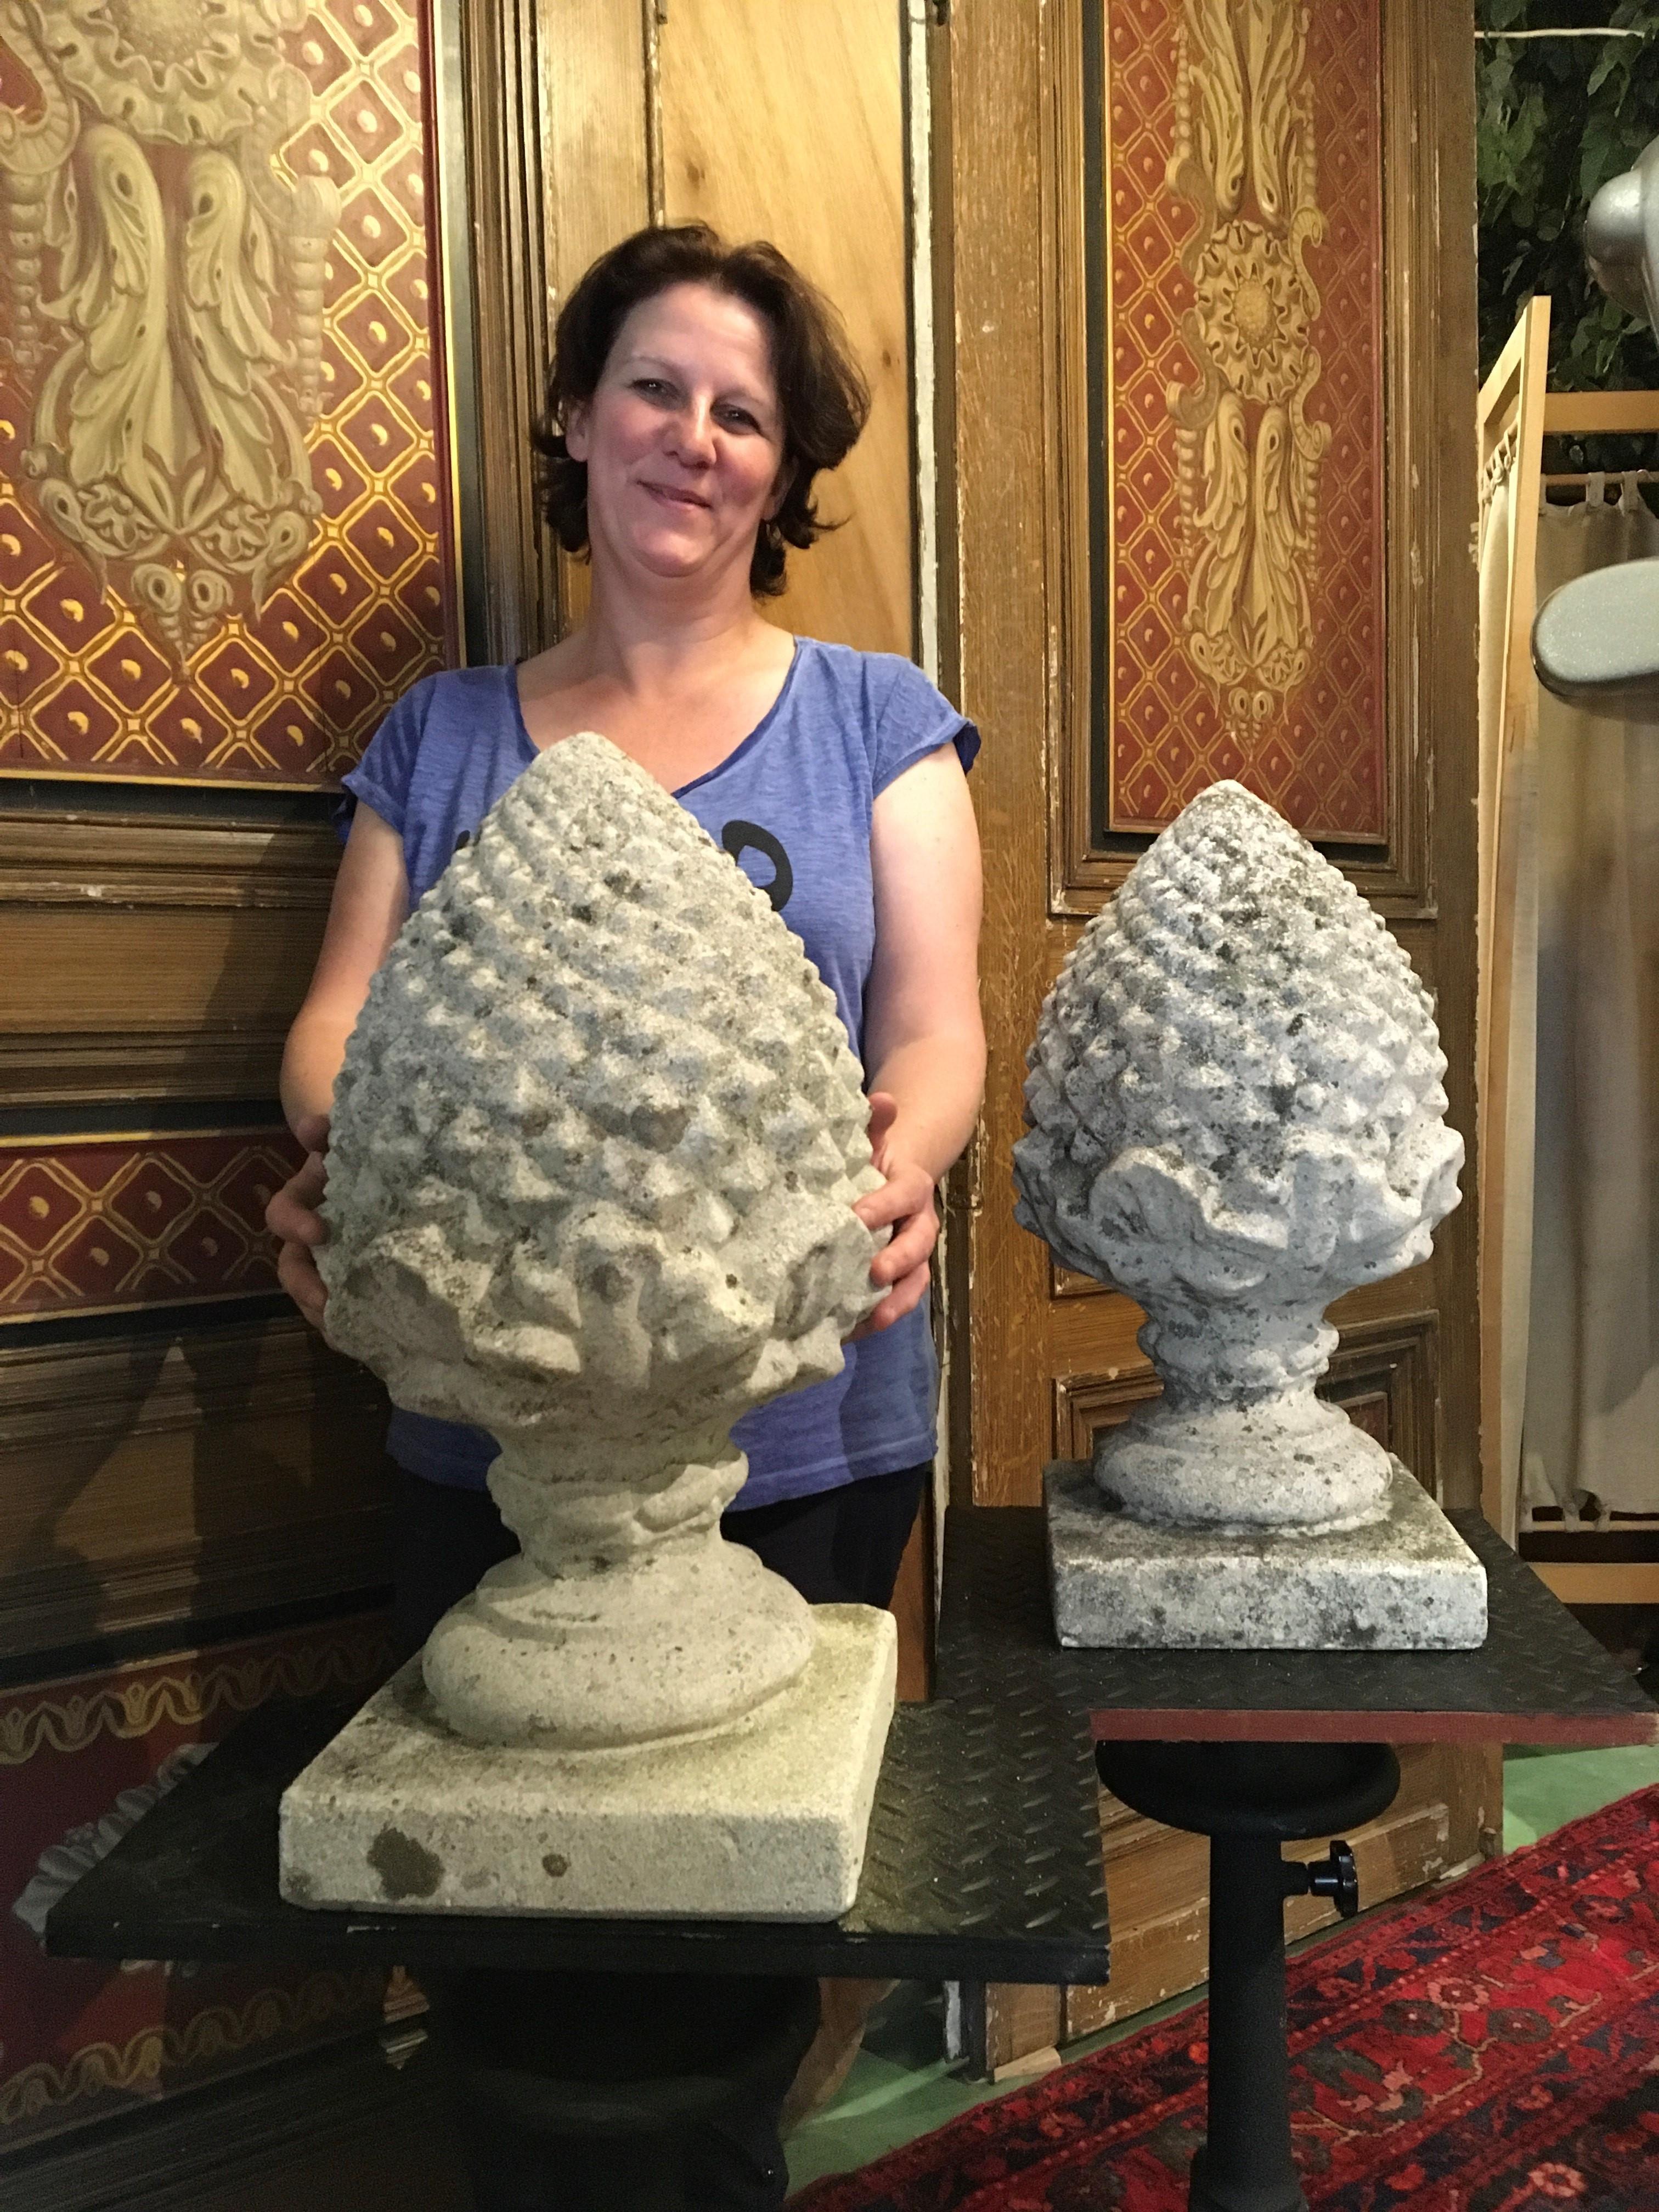 Pair of large concrete pinecone gate pillar finials. 
These large sized stone garden ornaments are great to place at the gate pillars or in the garden. Big concrete pinecone sculptures on soccles to use as decorative items or finishing touch.